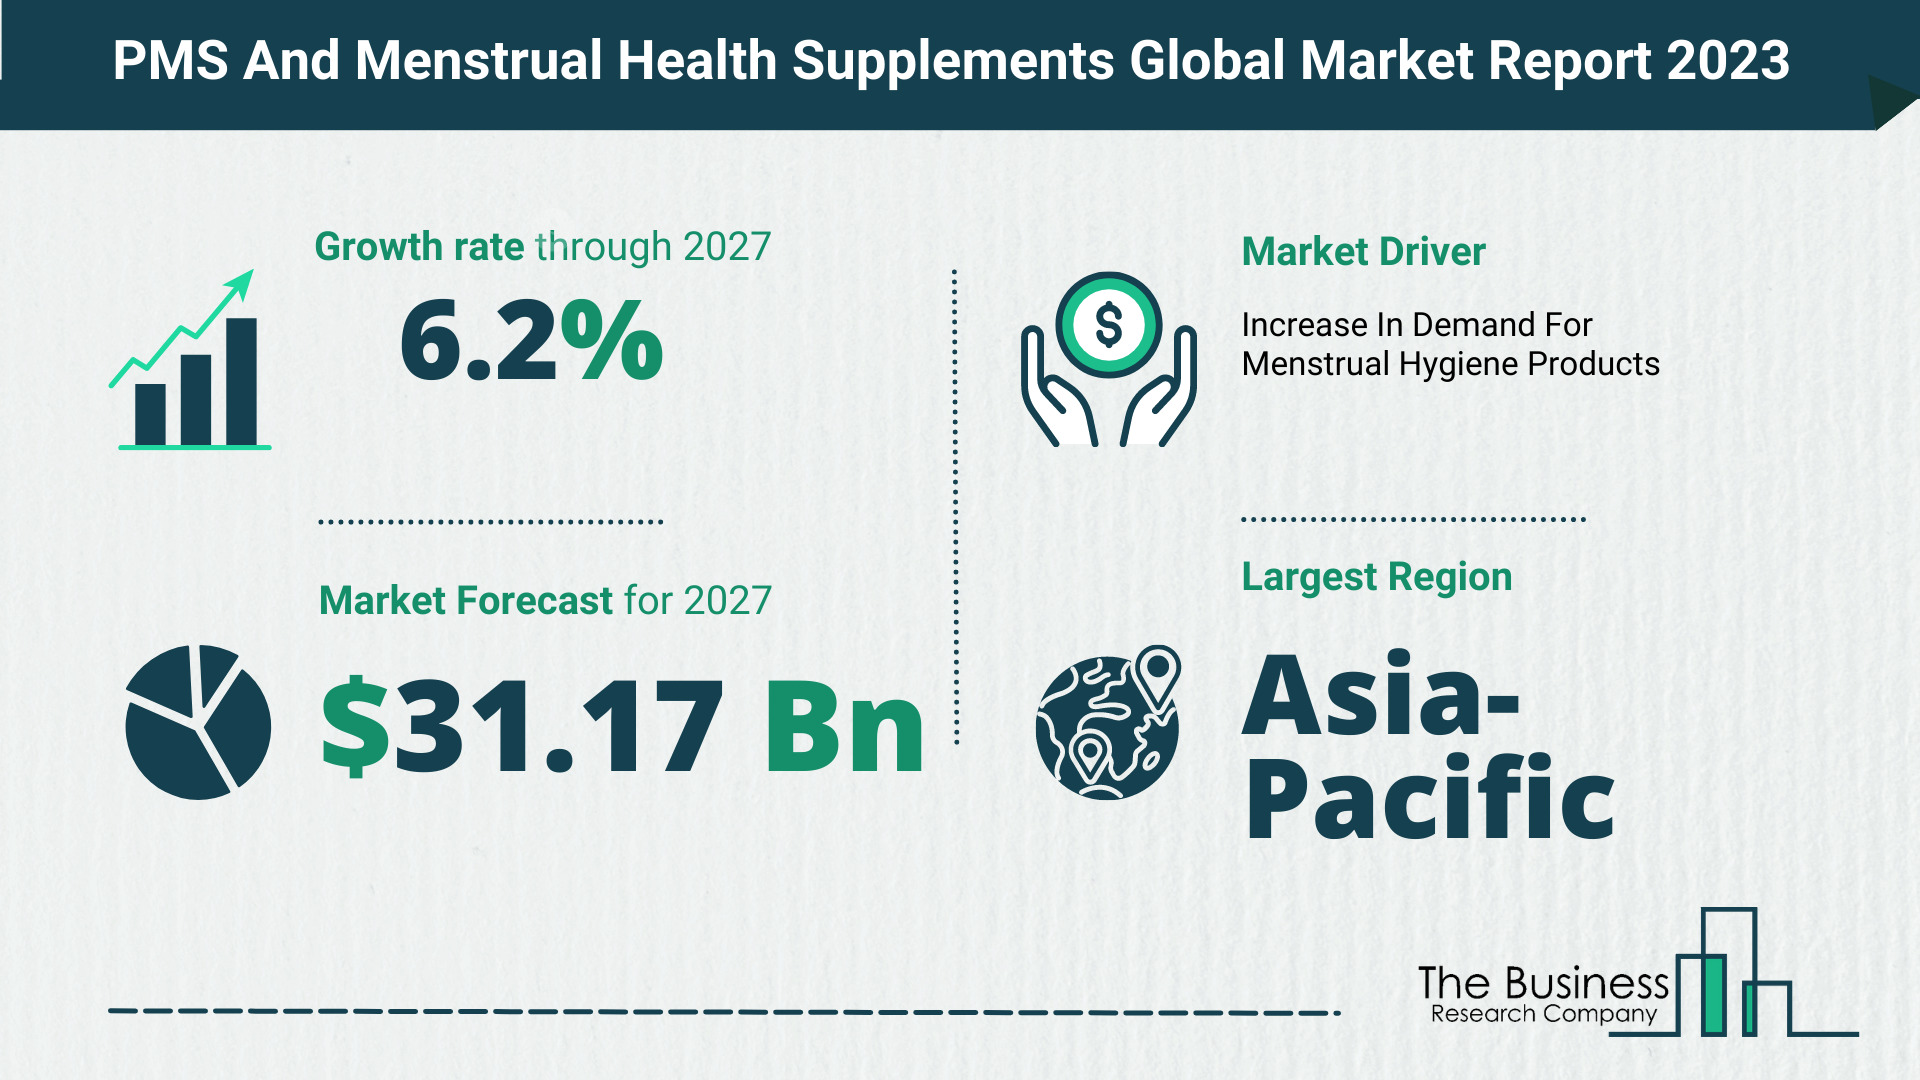 How Will The PMS And Menstrual Health Supplements Market Globally Expand In 2023?